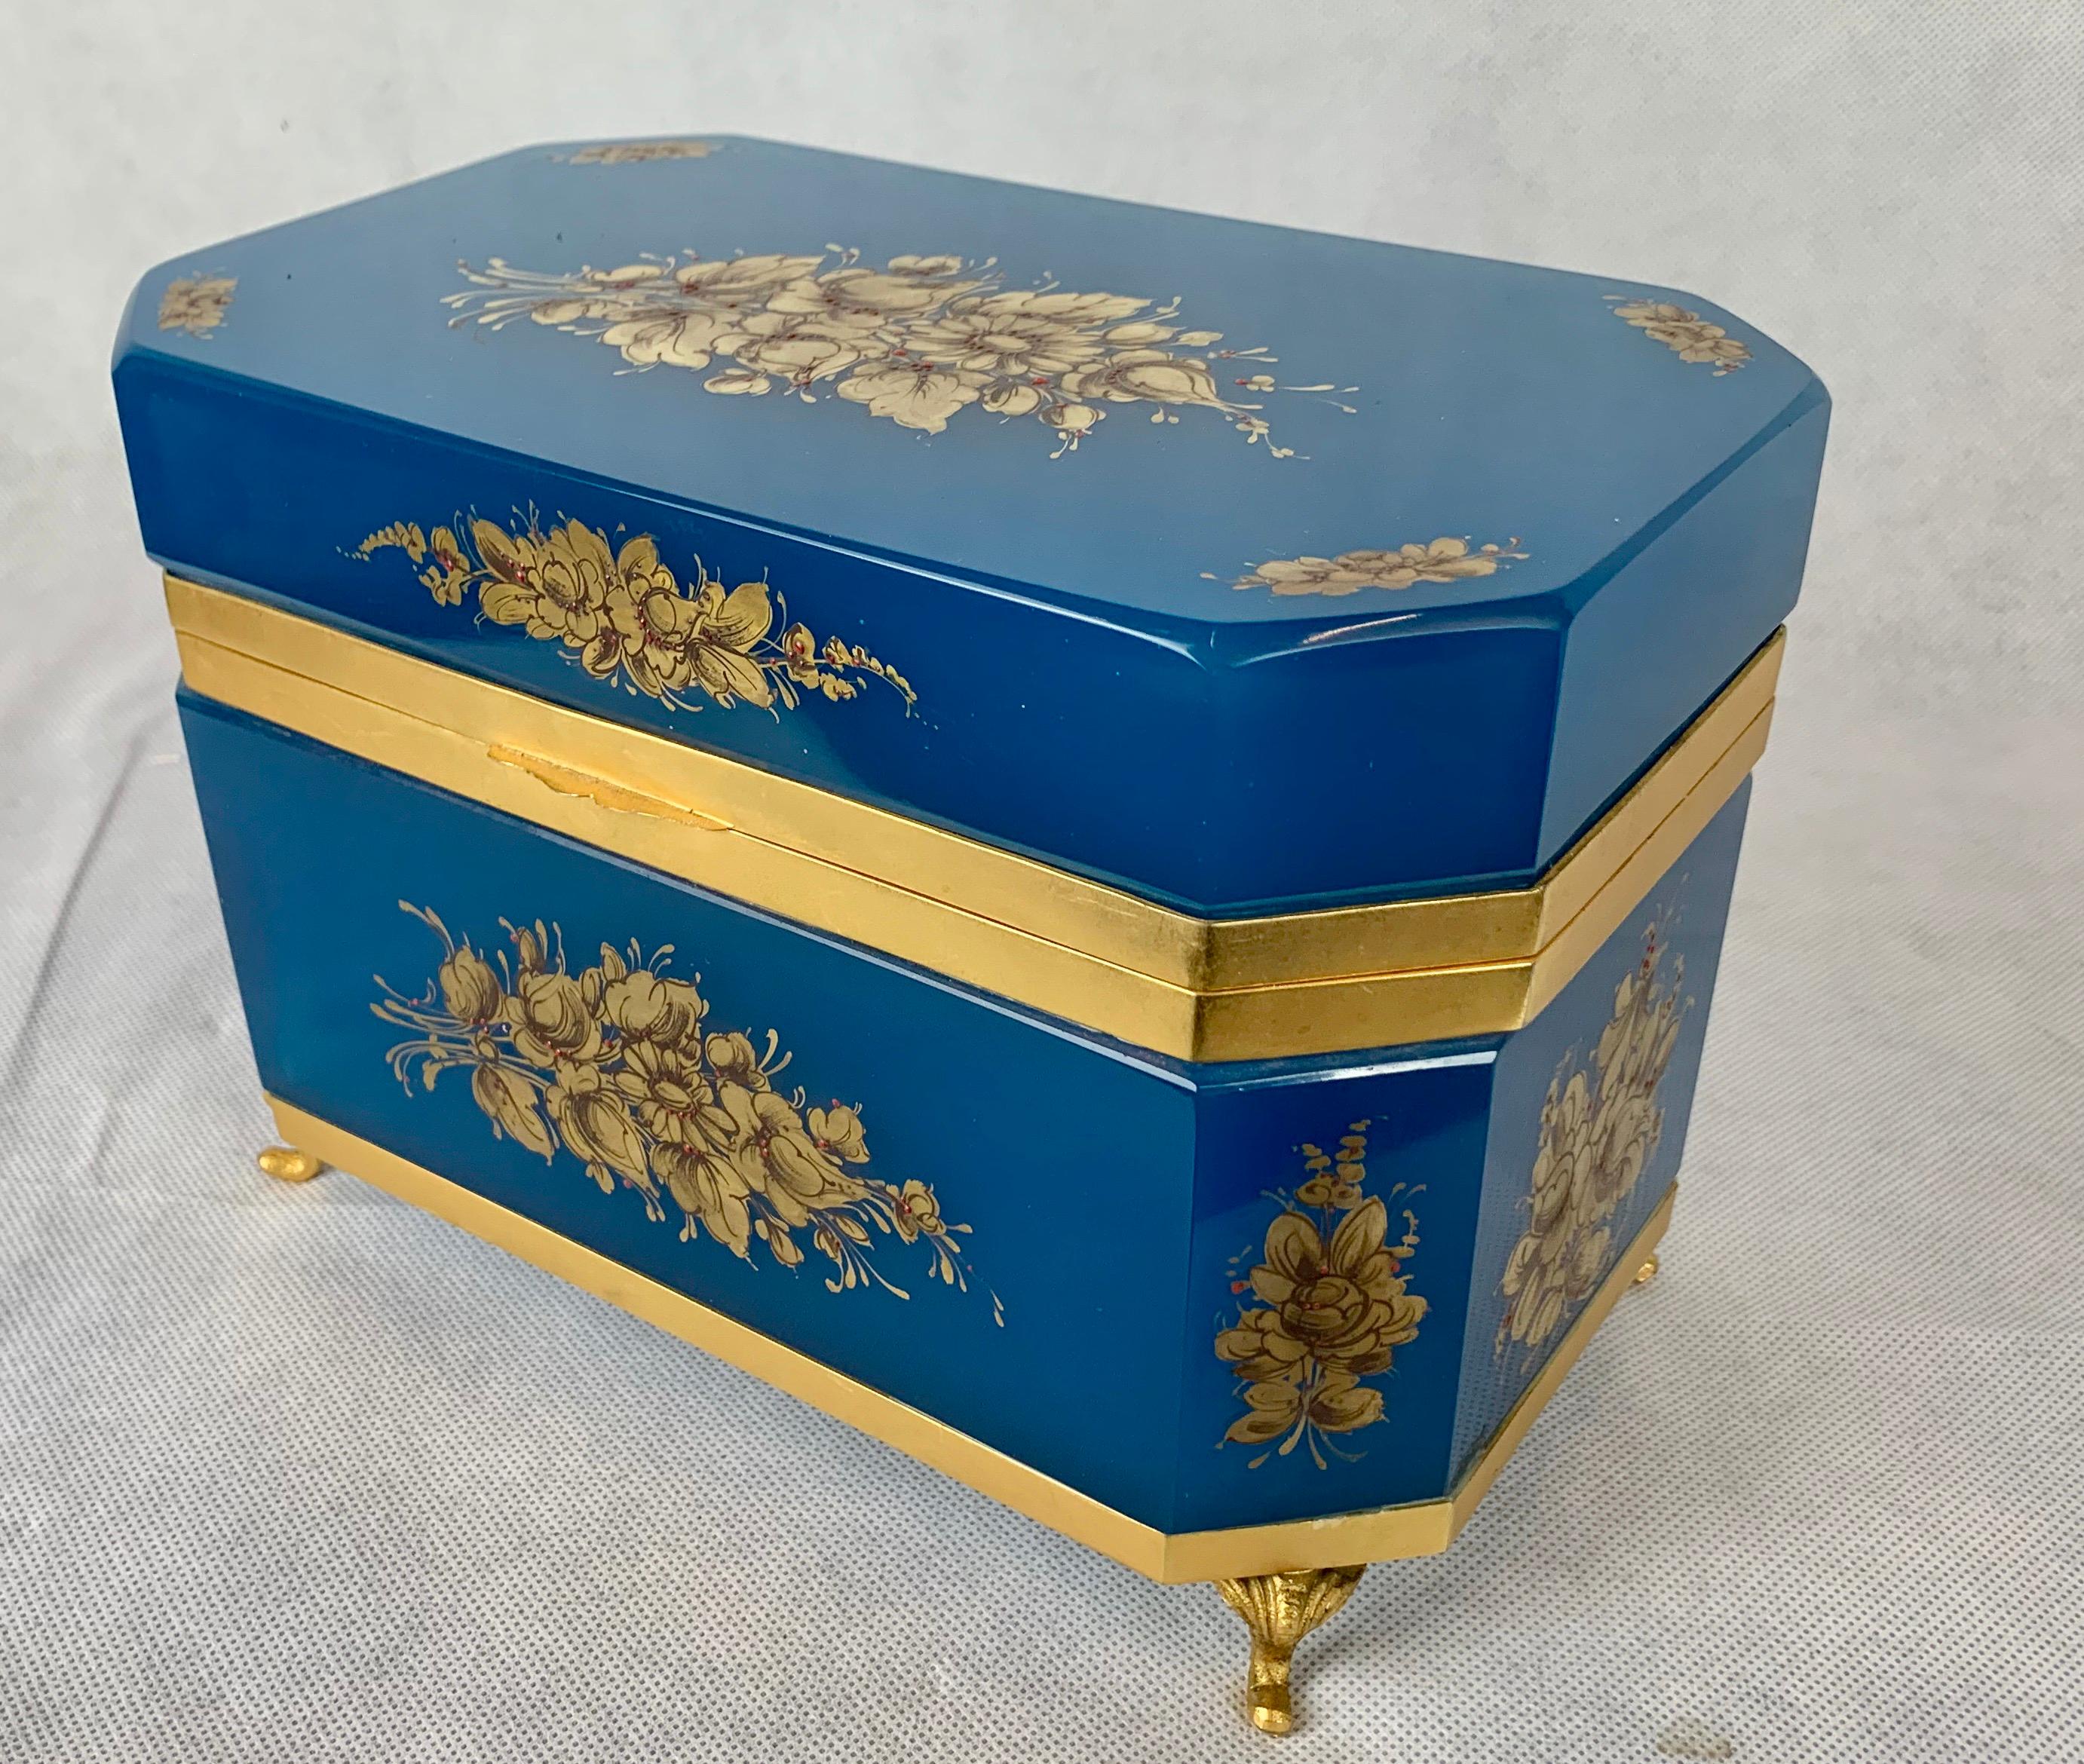 Large French blue Opaline glass box.  Hand painted with gilt floral sprays. Hinged bronze doré frame with thumb catch and cabriole feet. The rectangular shape has cut corners and gilt decoration on all sides.
The opaline box is in beautiful